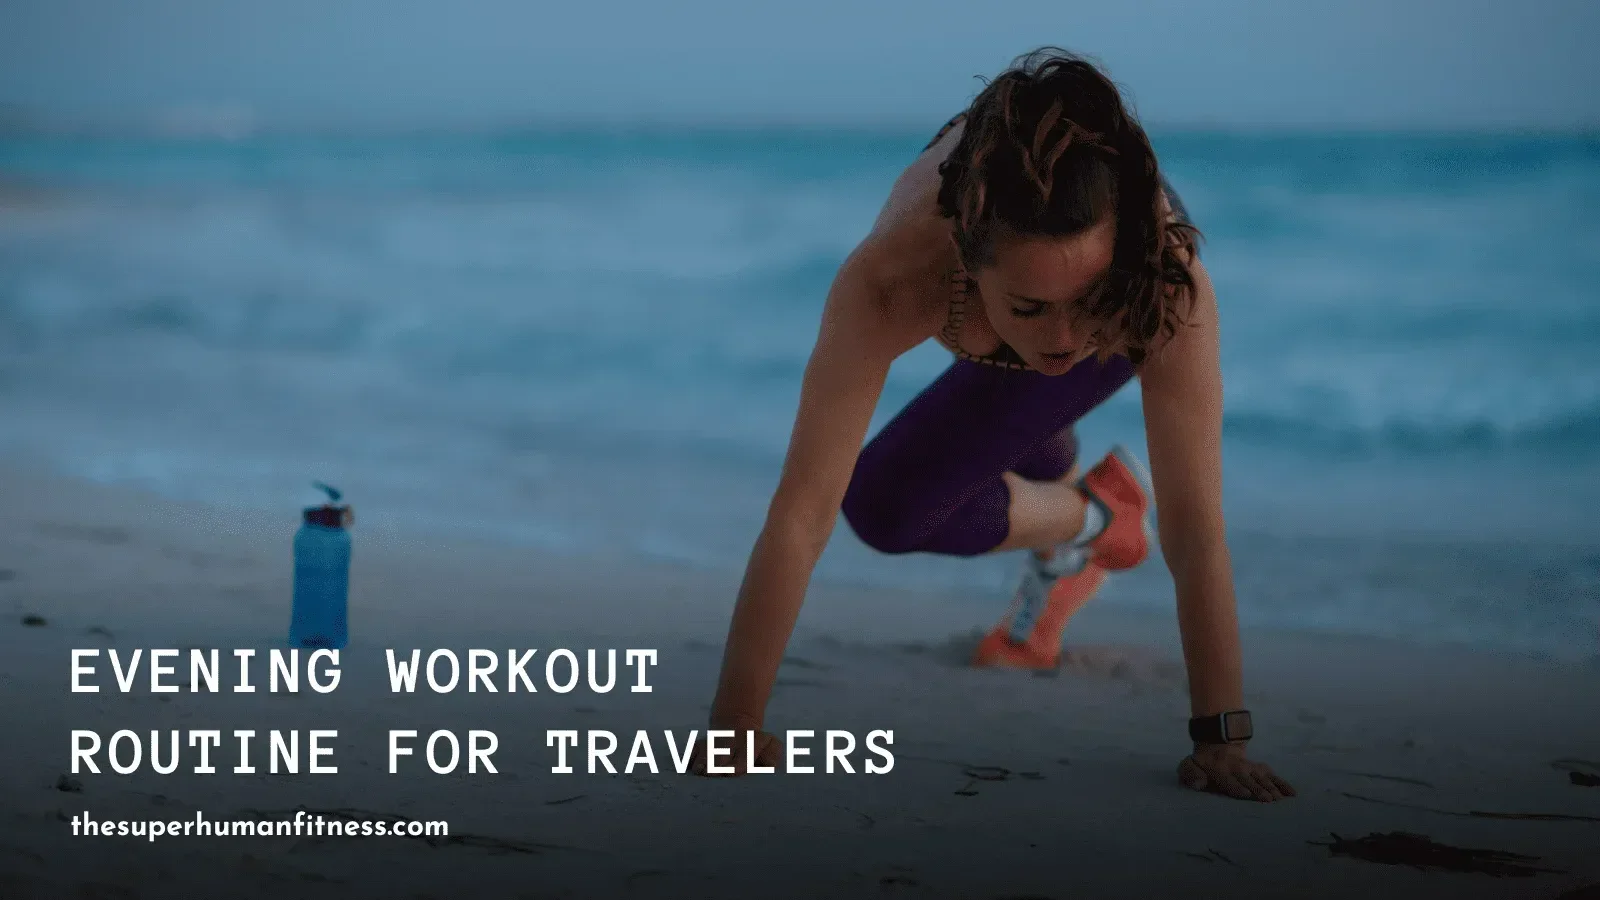 Evening Workout Routine for travelers